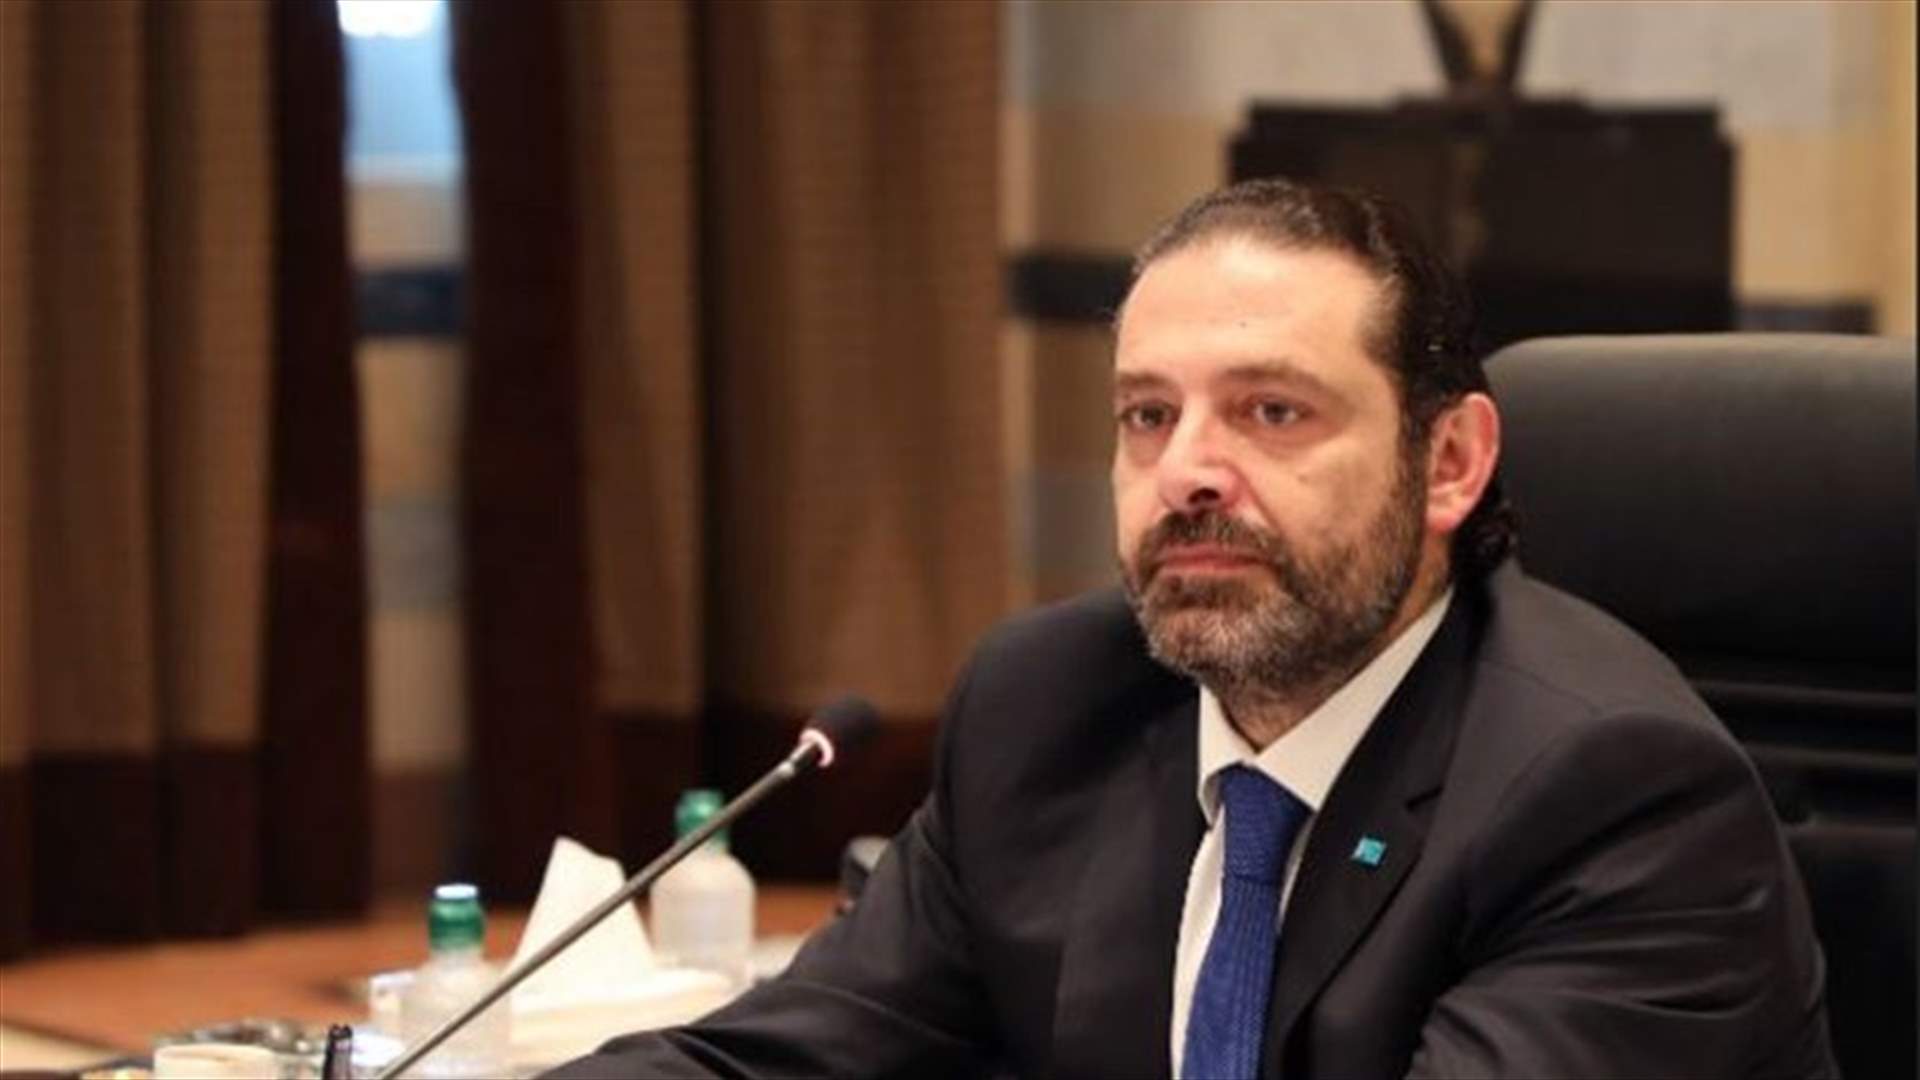 PM Hariri during cabinet session: We cannot keep moving at the same pace